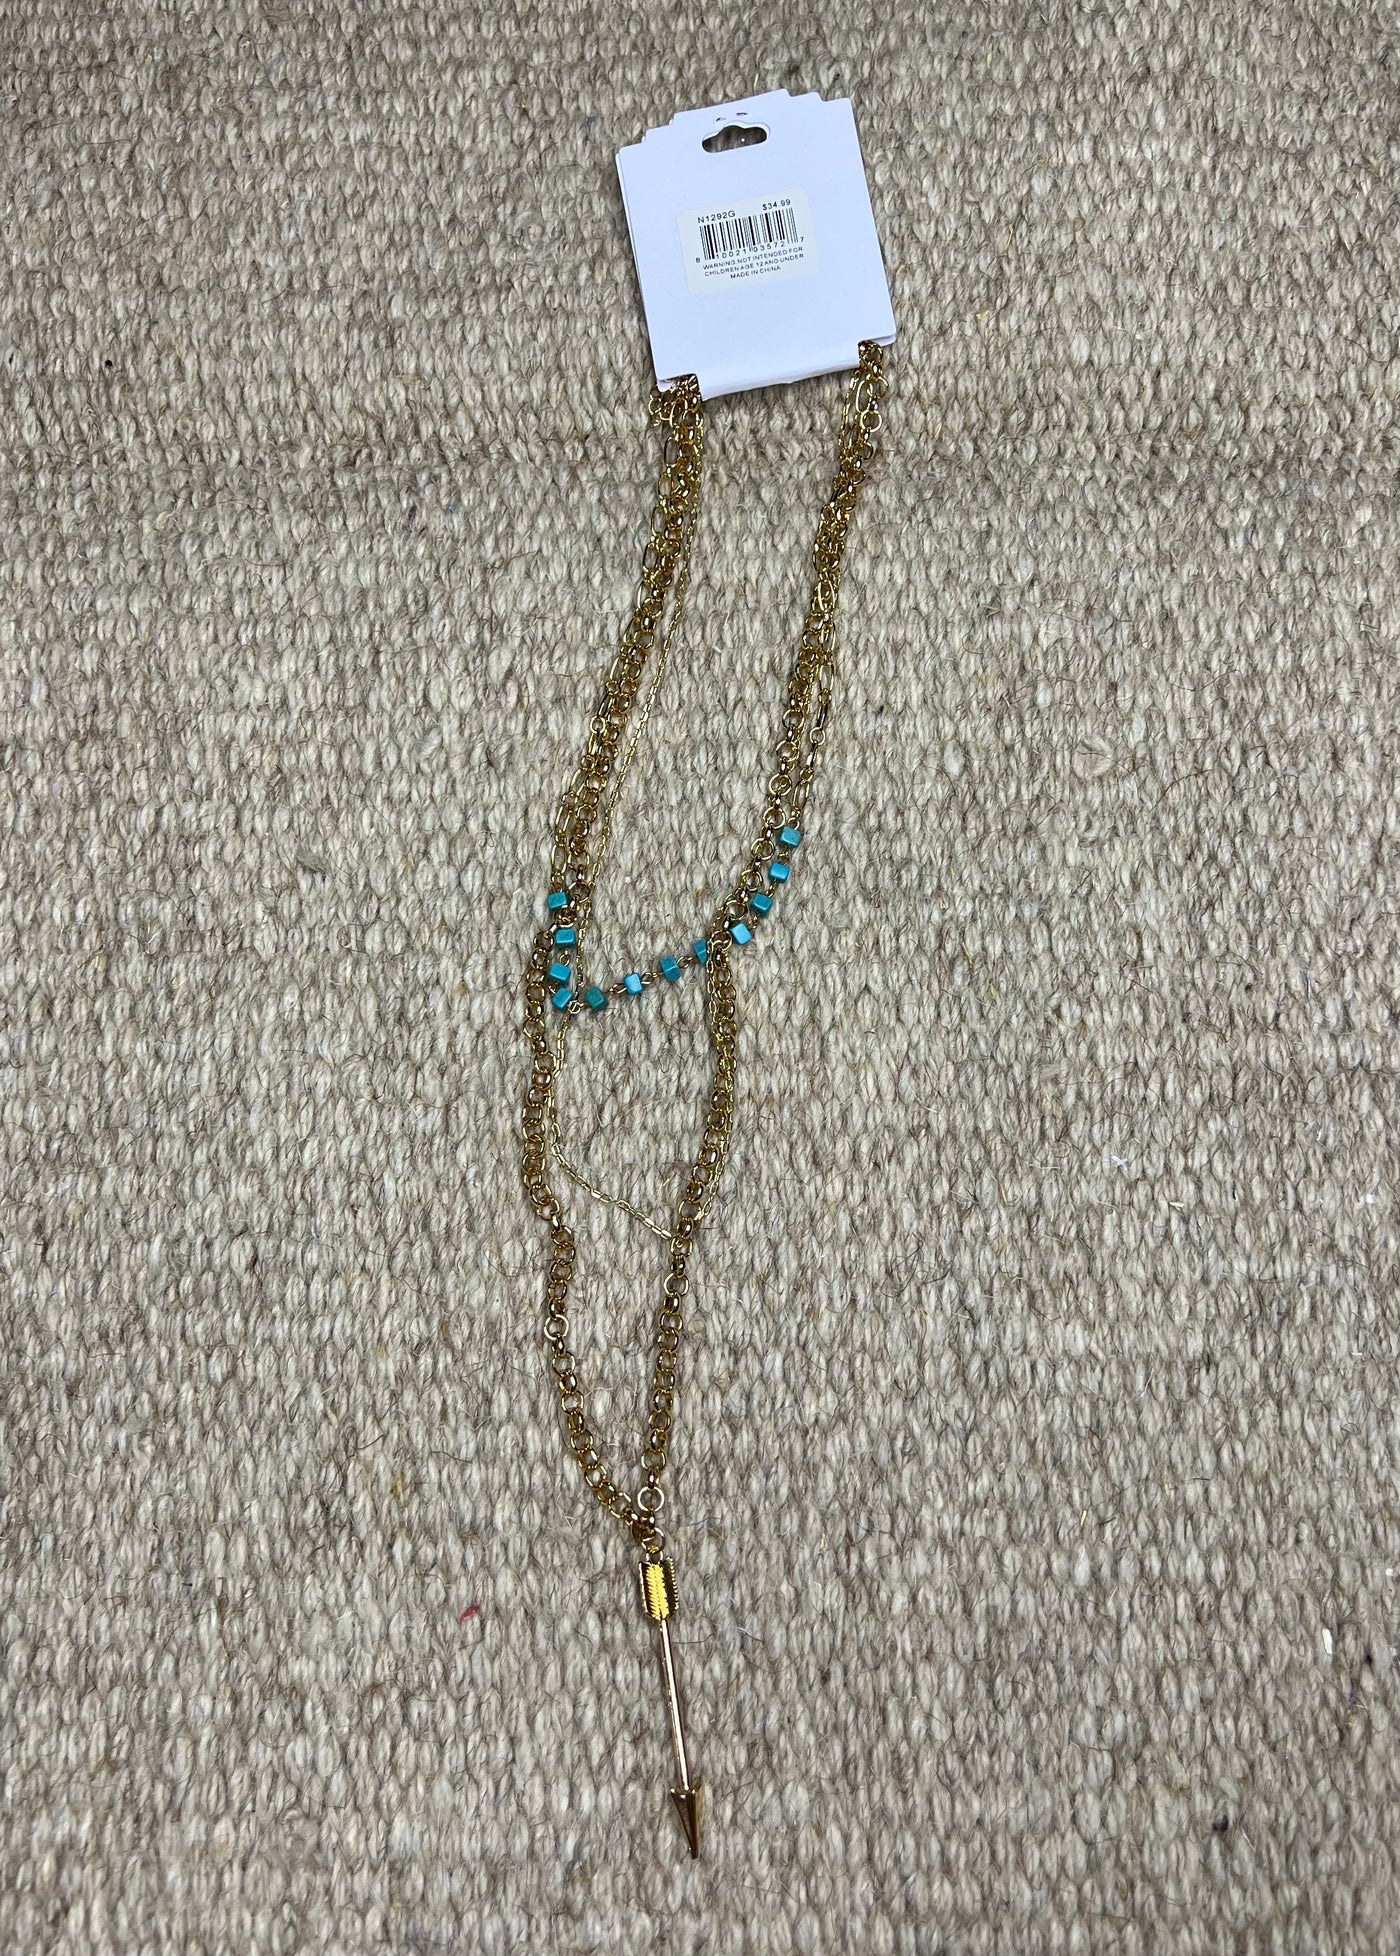 West & Co. Layered 3 Strand Gold Chain Necklace w/Turquoise Accents and Arrow Pendant